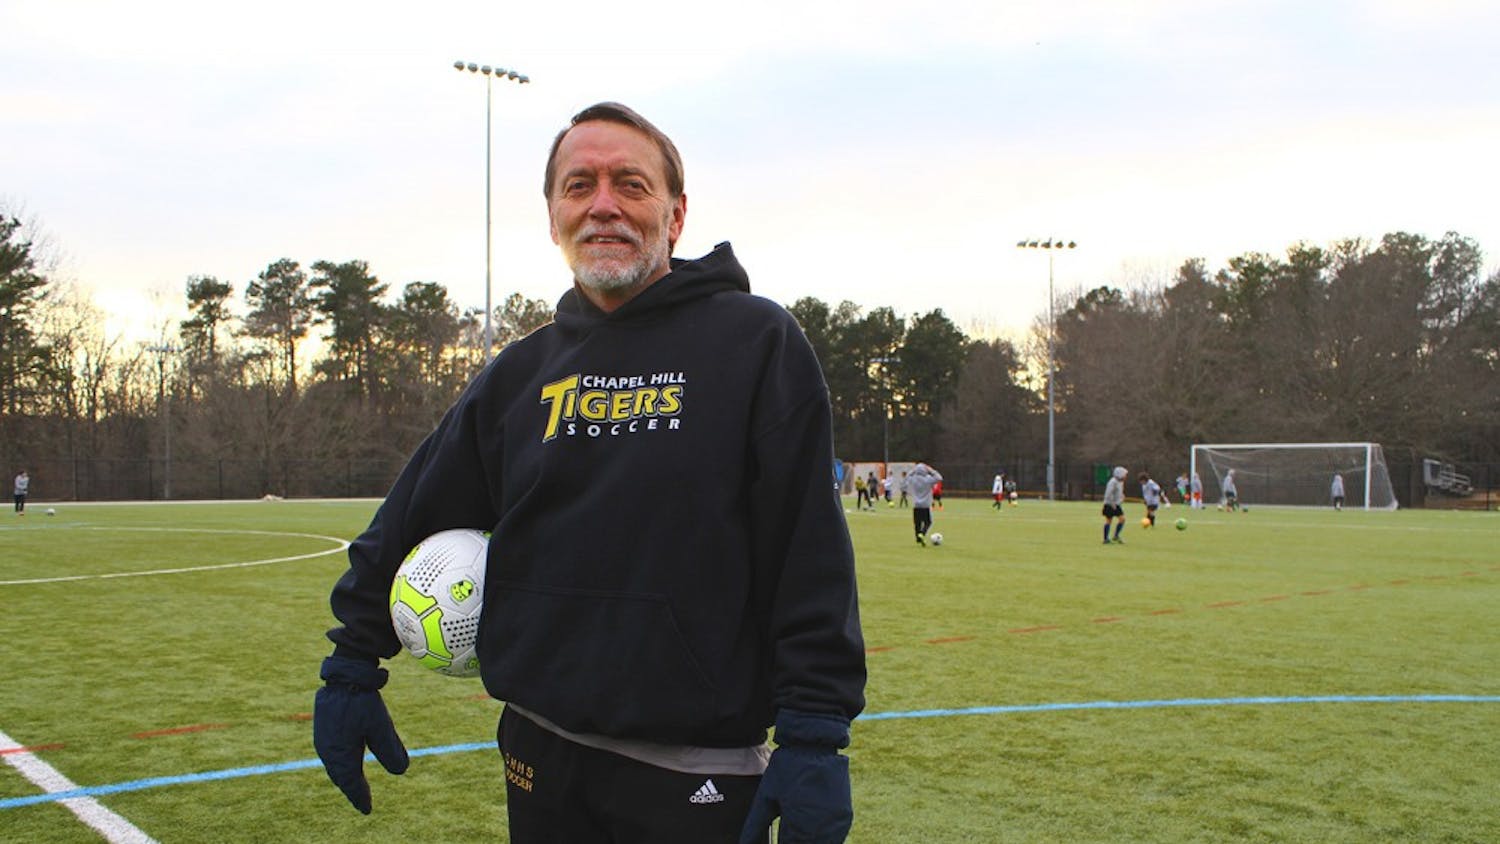 Ron Benson, a UNC graduate, has been an influential member of the Chapel Hill soccer community. He coached in the Chapel Hill school system for years and teamed up with Anson Dorrance to start North Carolina soccer camps.